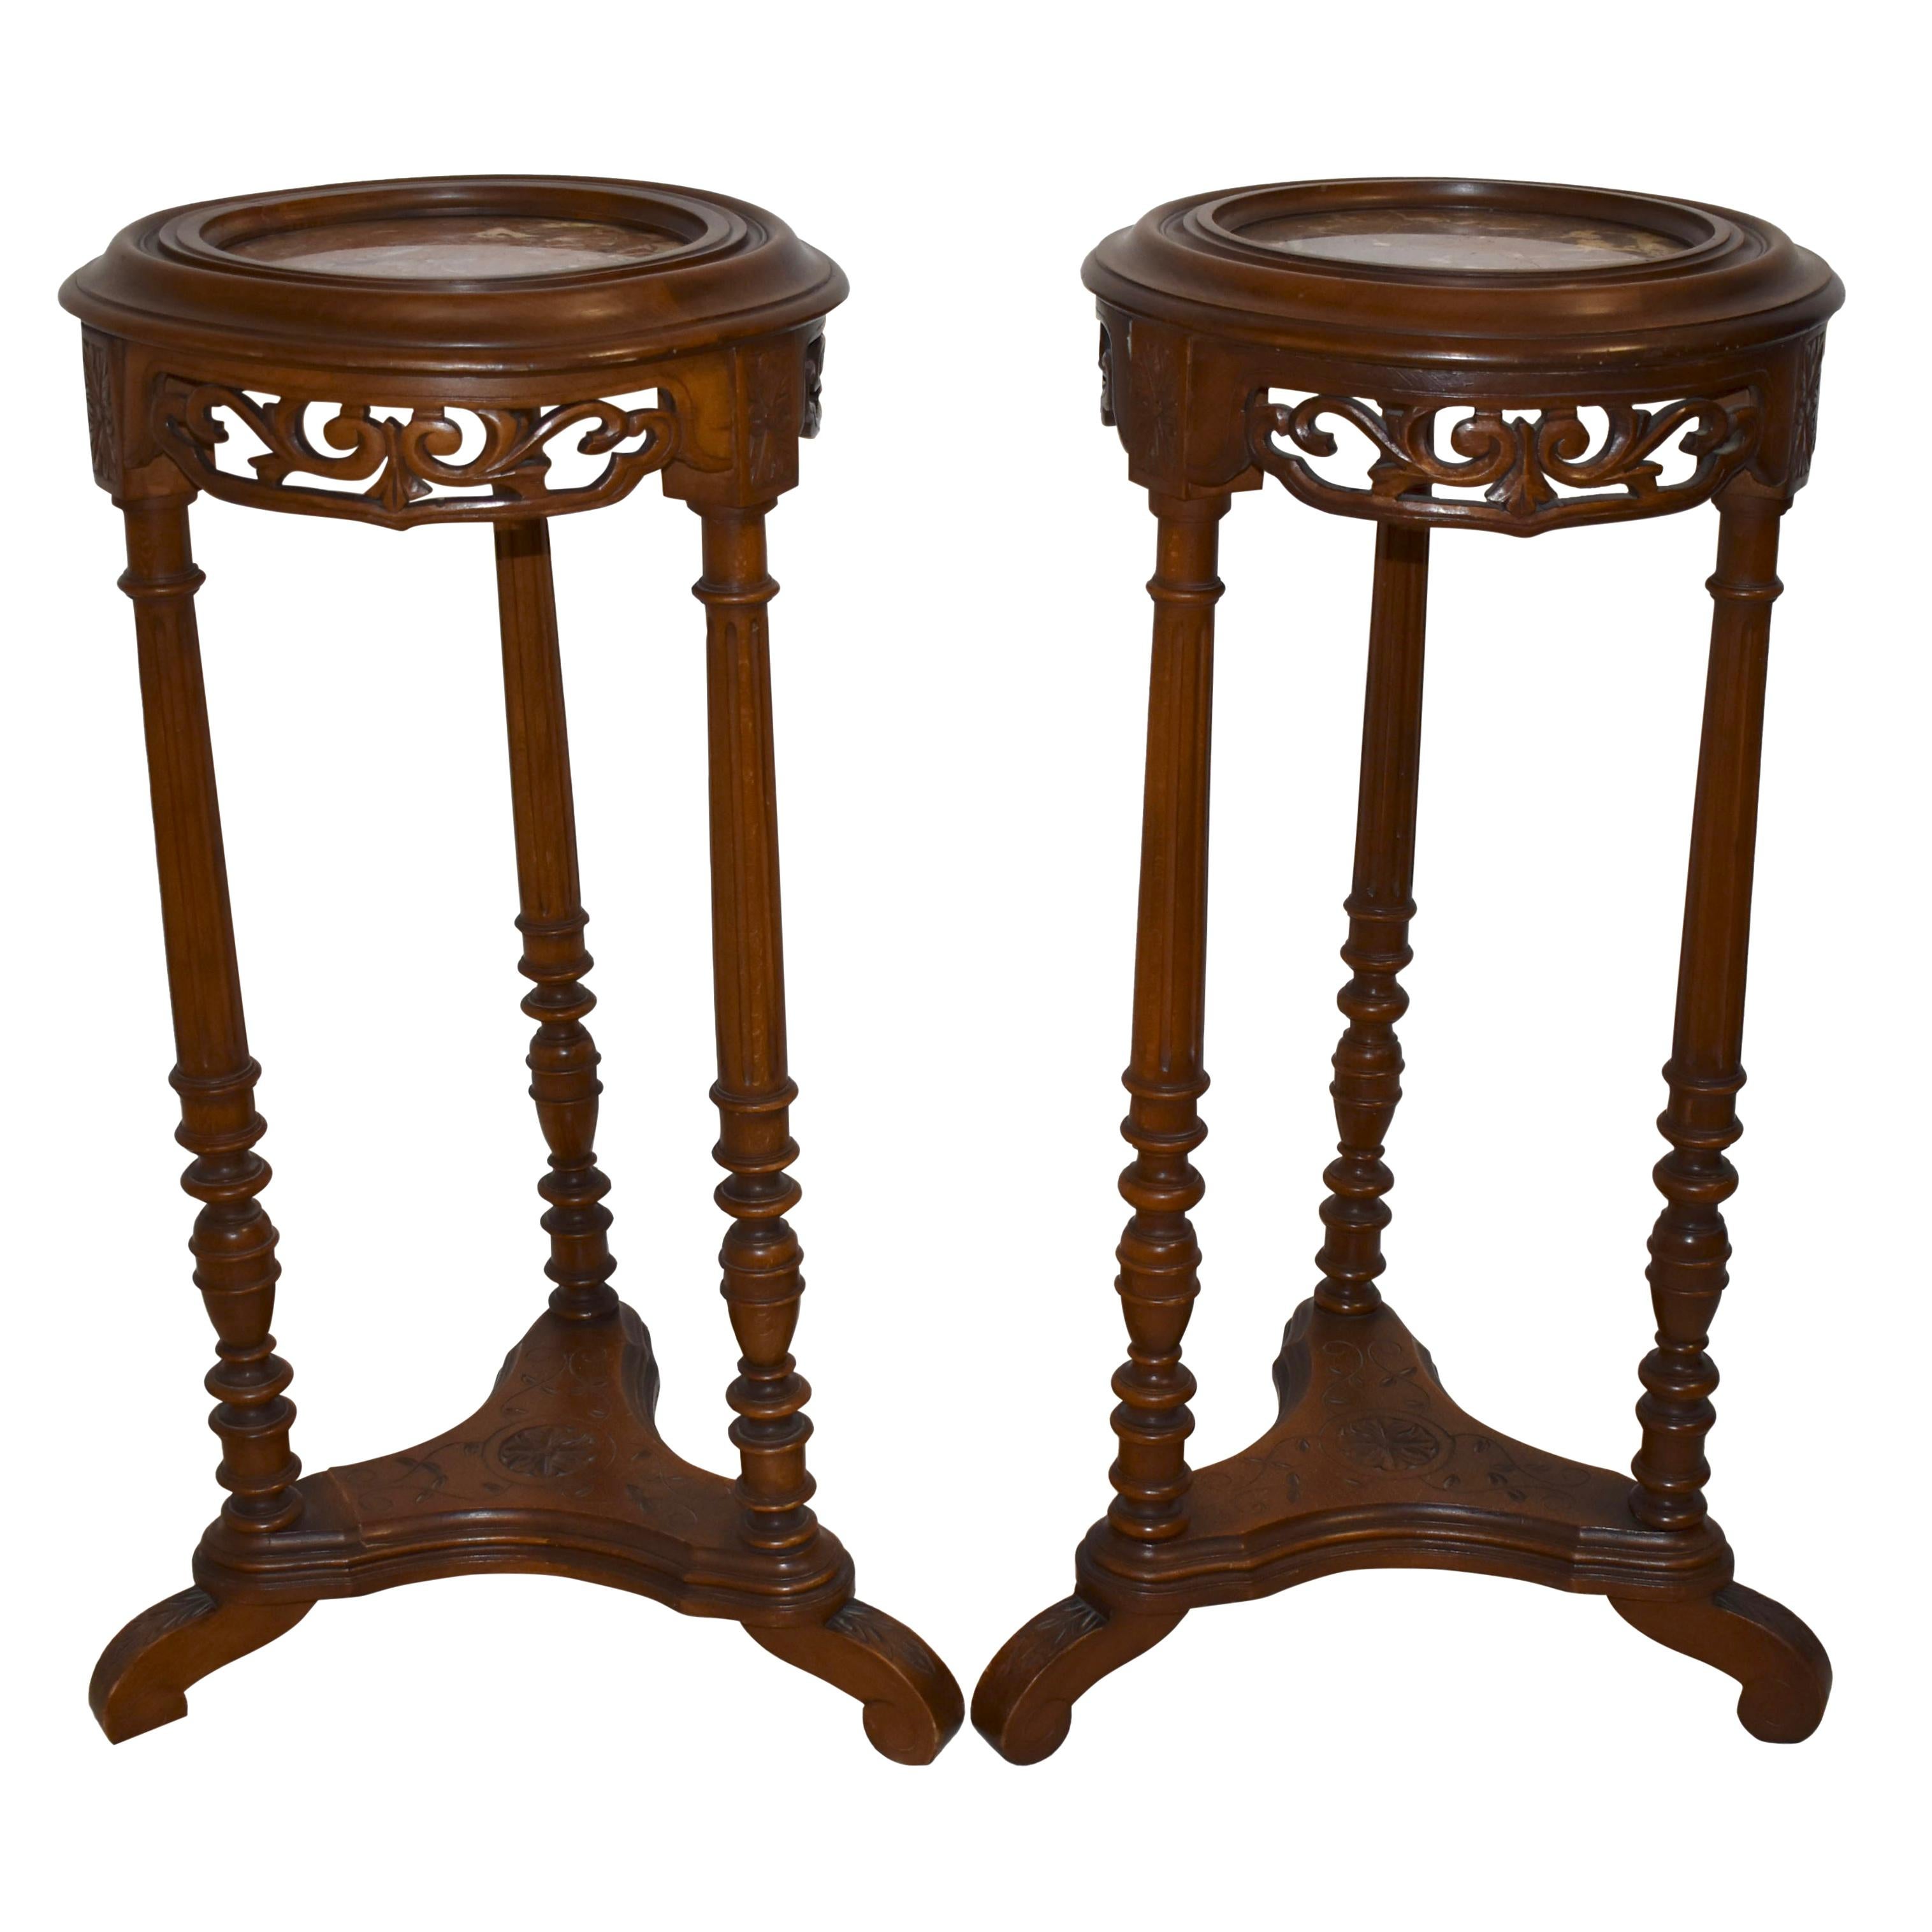 French Mahogany Side Tables/Candle Stands with Marble Tops, Set of 2, circa 1900 For Sale 2